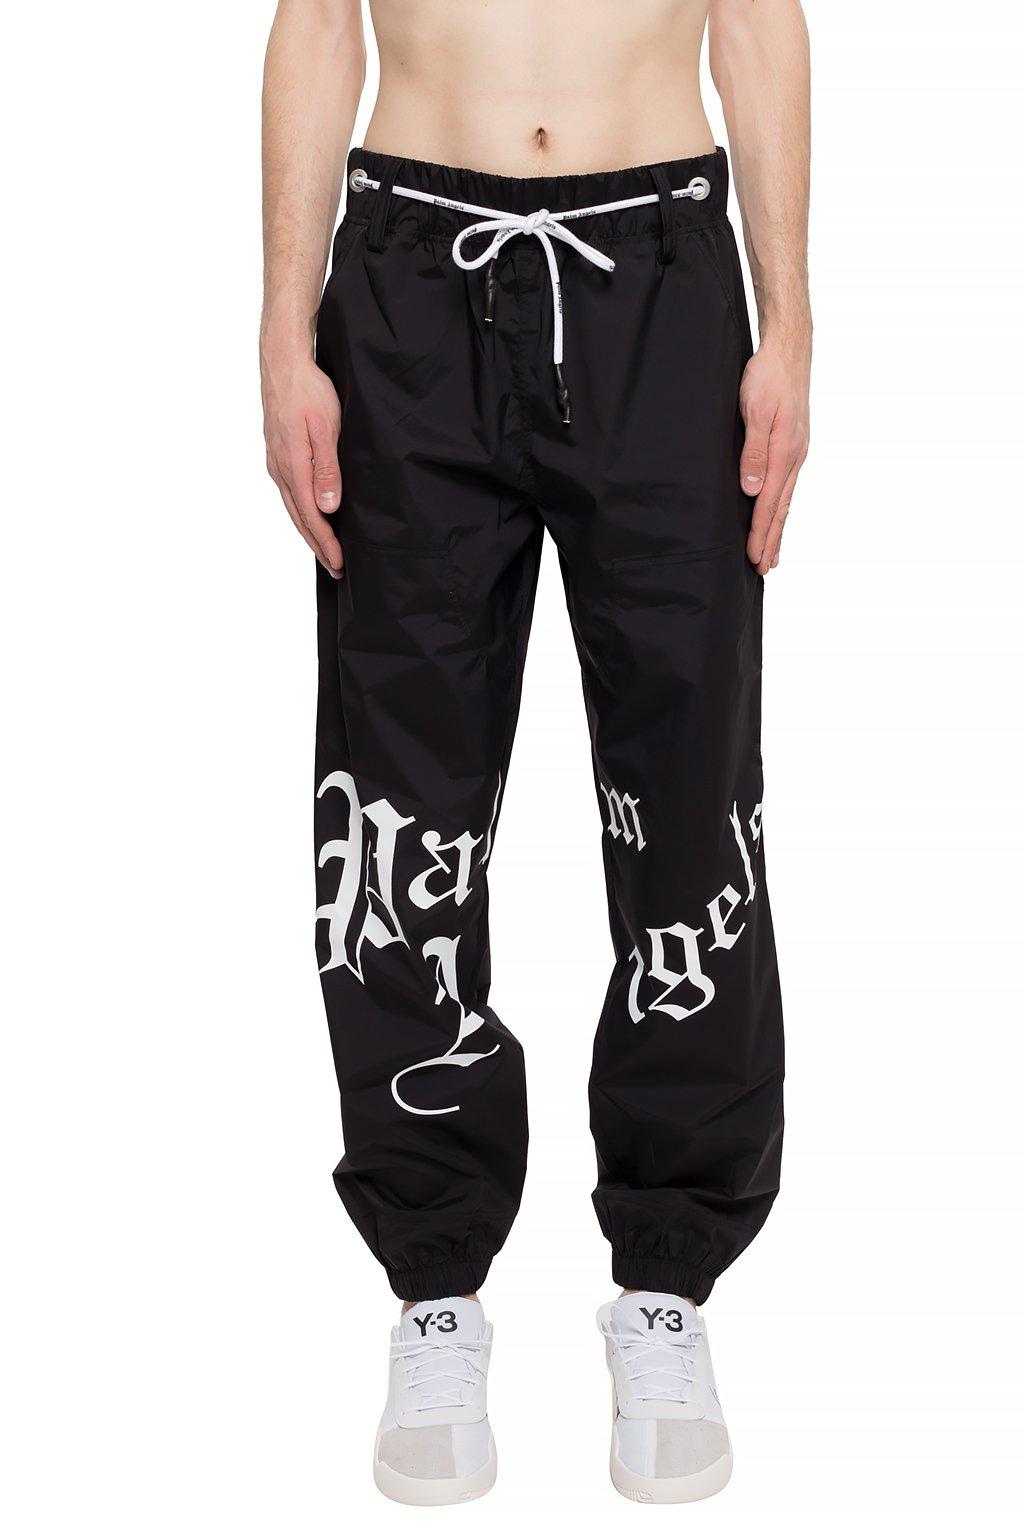 Palm Angels Rubber Sweatpants With Logo Black for Men - Lyst